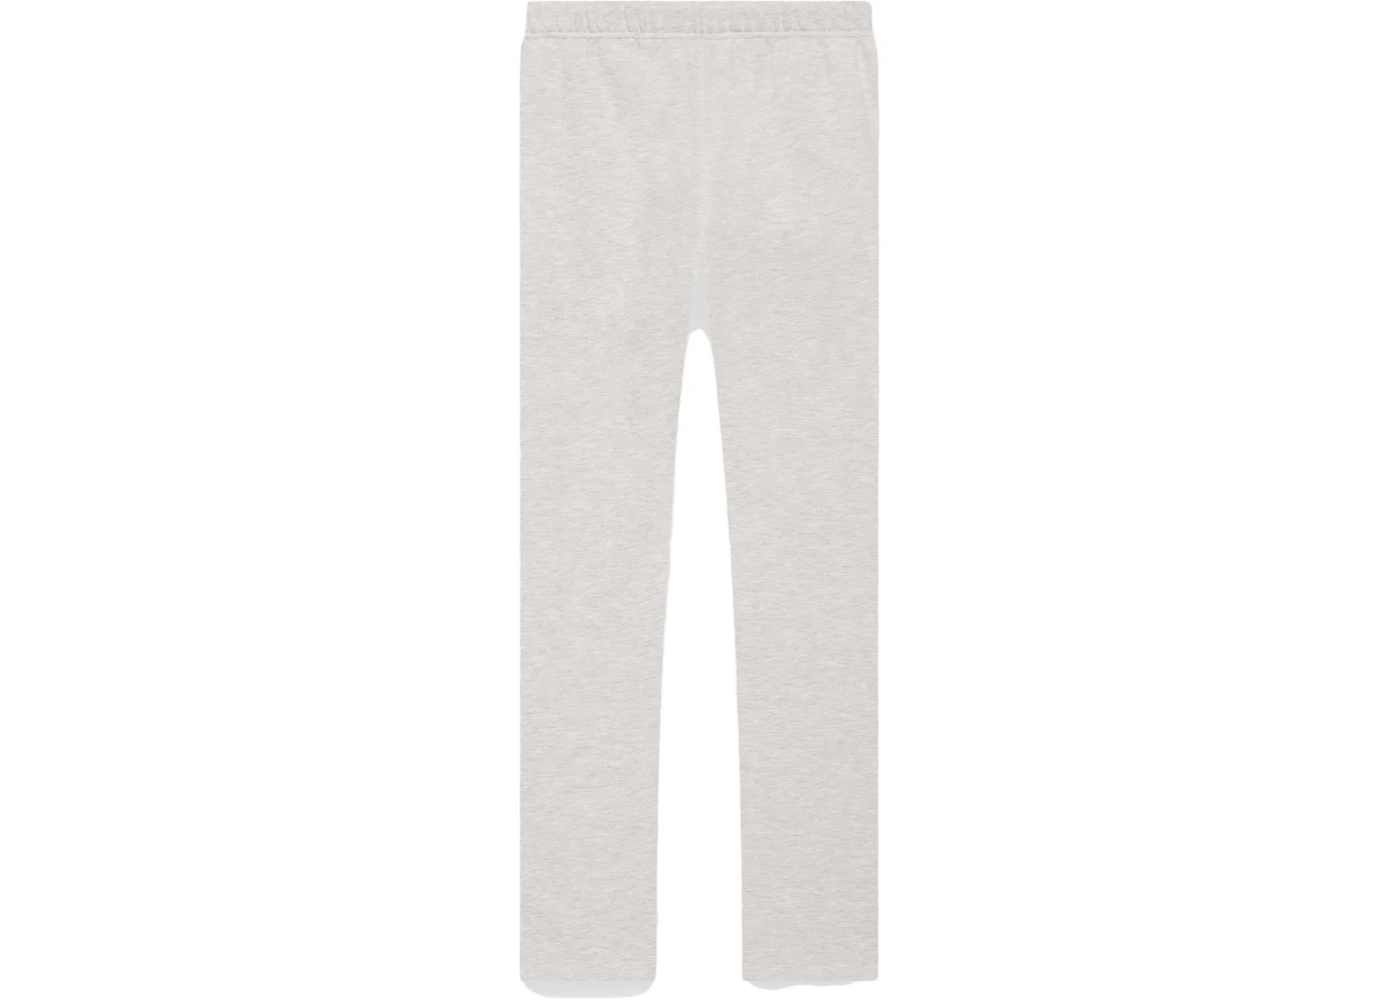 Fear of God Essentials Relaxed Sweatpants Light Oatmeal Men's - SS22 - US